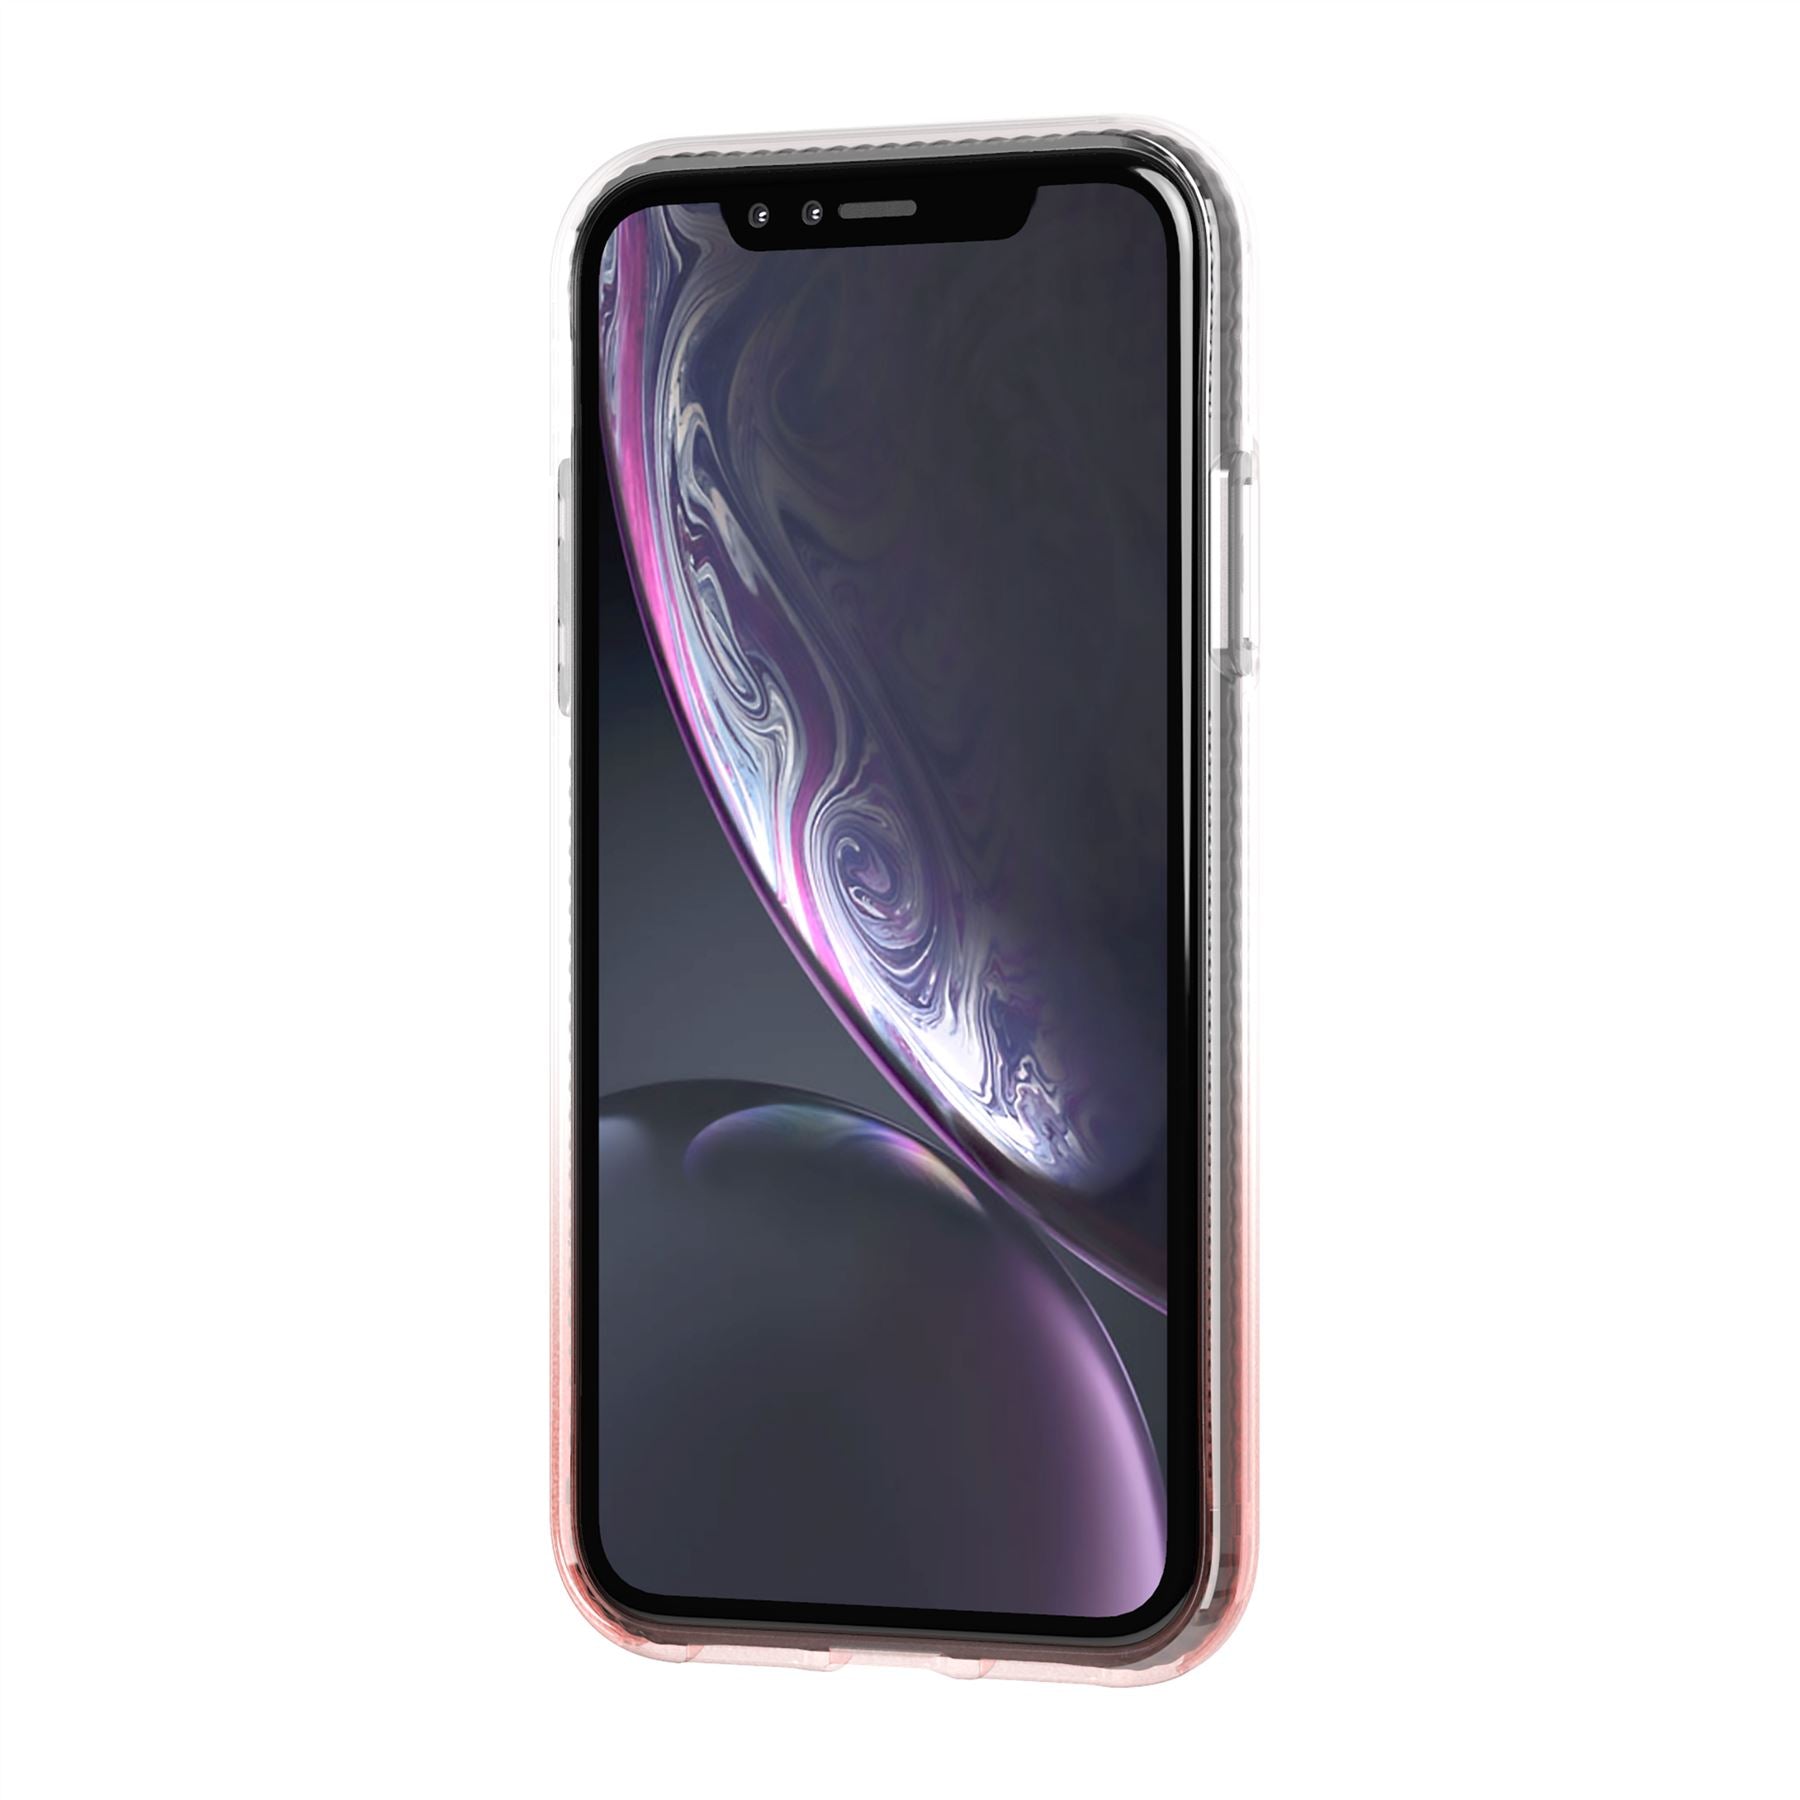 Apple Iphone Xr Wallpapers